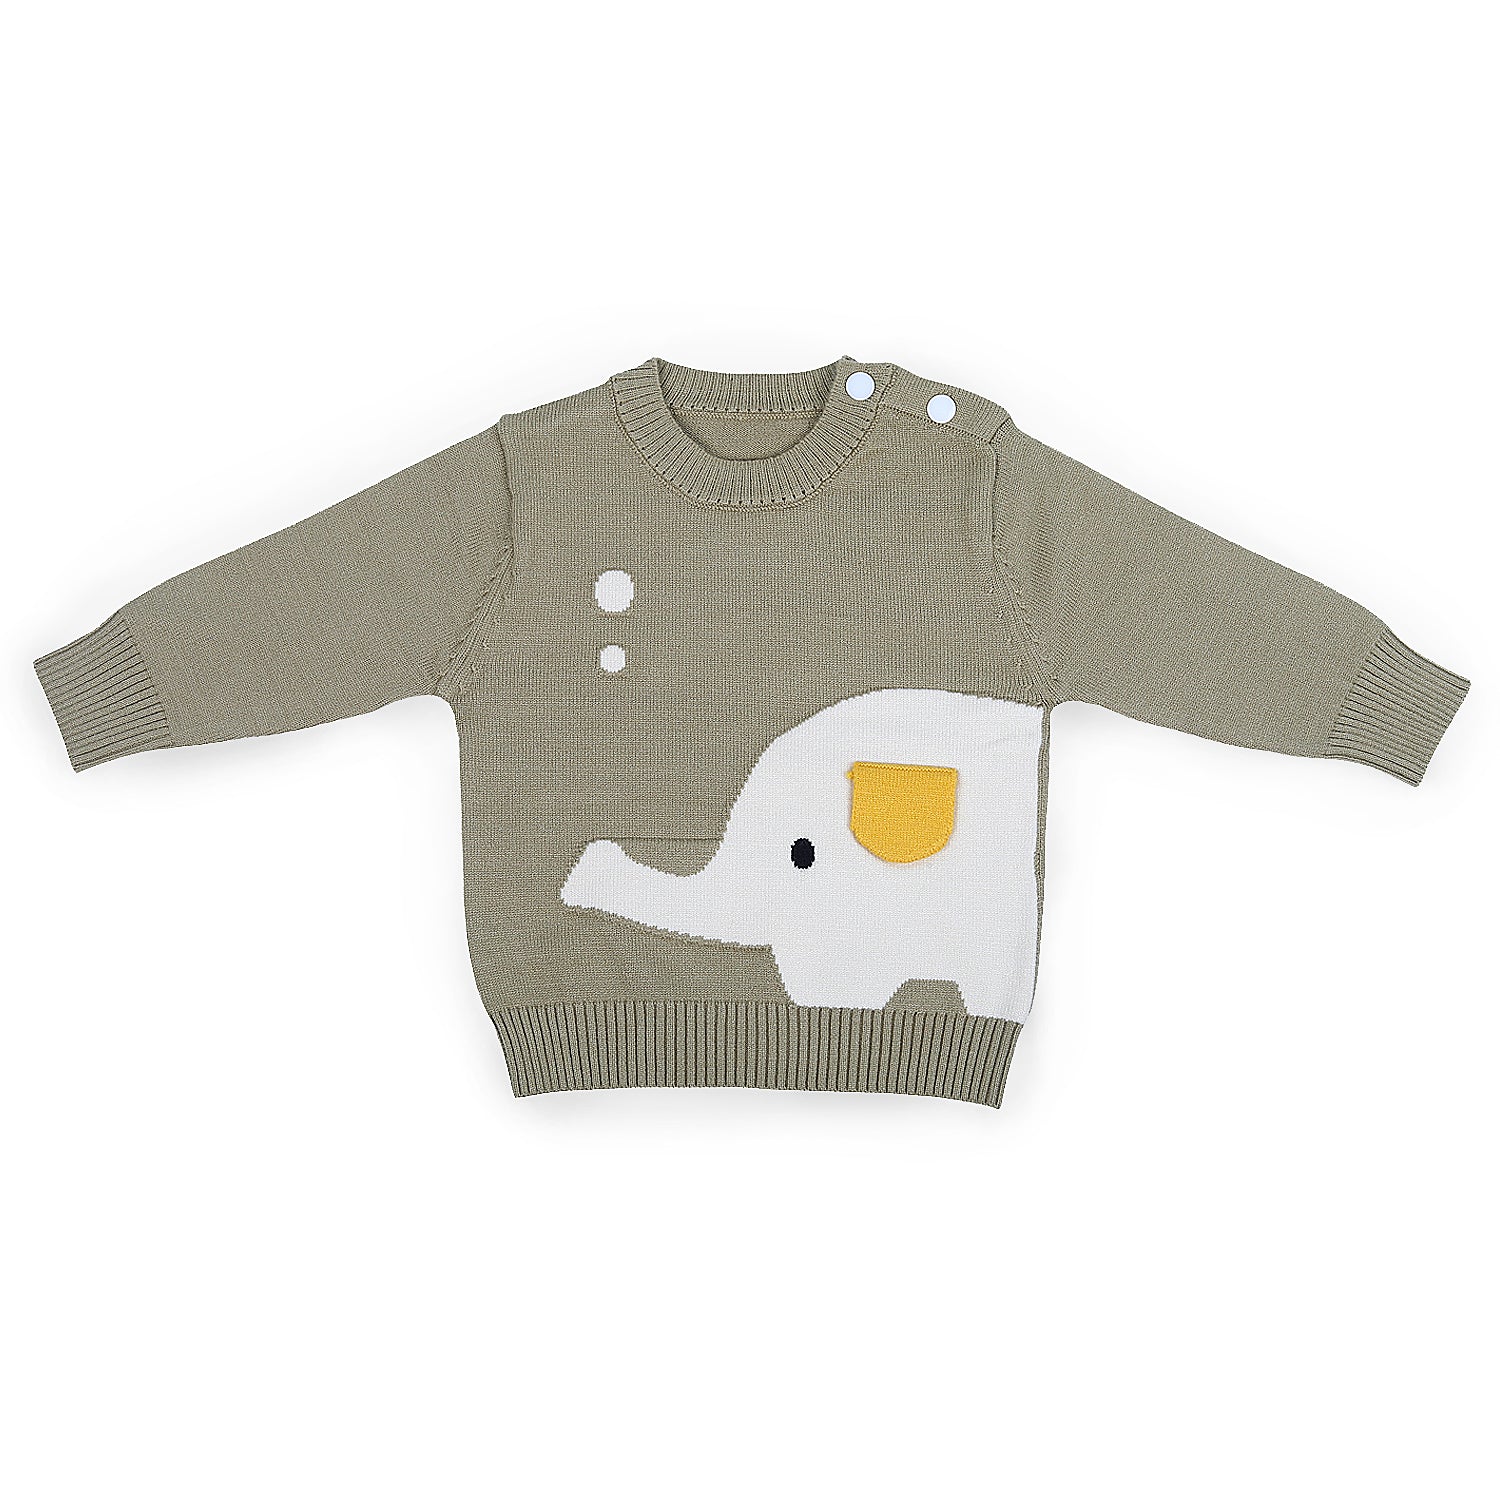 Elephant With 3D Ear Premium Full Sleeves Knitted Sweater - Olive Green